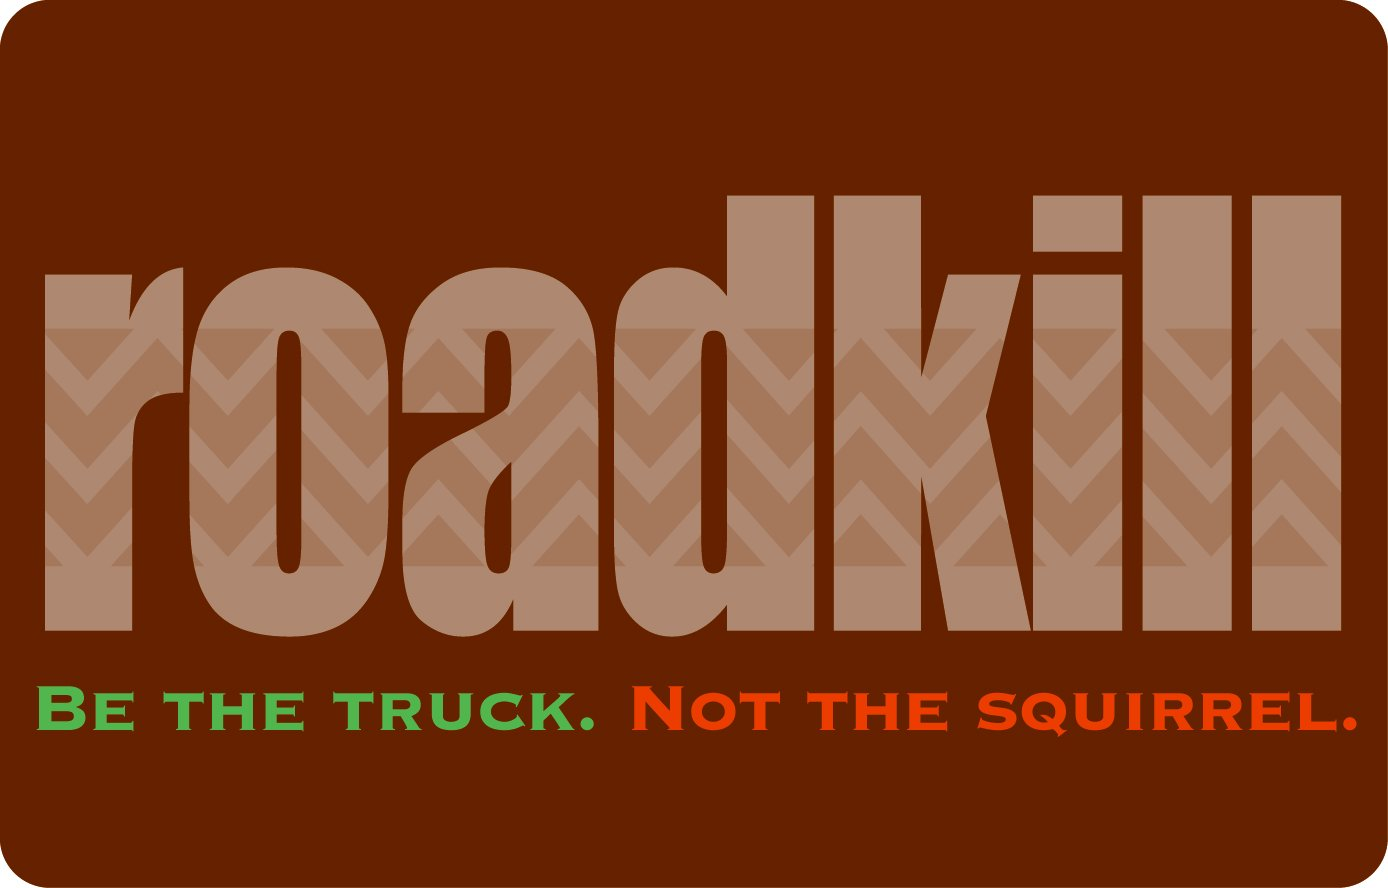 Trademark Logo ROADKILL BE THE TRUCK. NOT THE SQUIRREL.